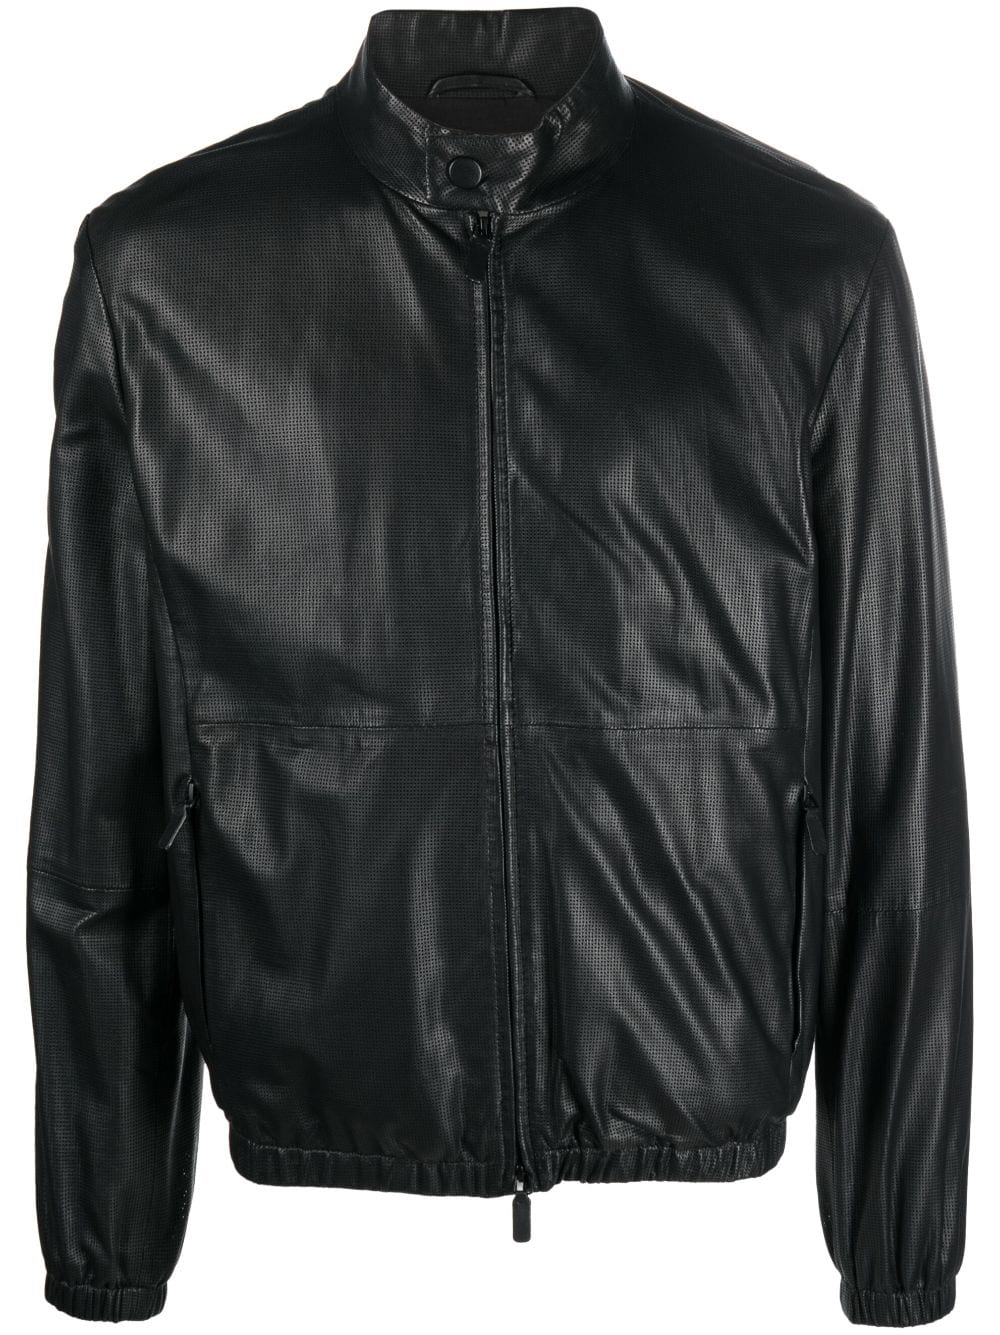 Emporio Armani Perforated Leather Bomber Jacket - Farfetch